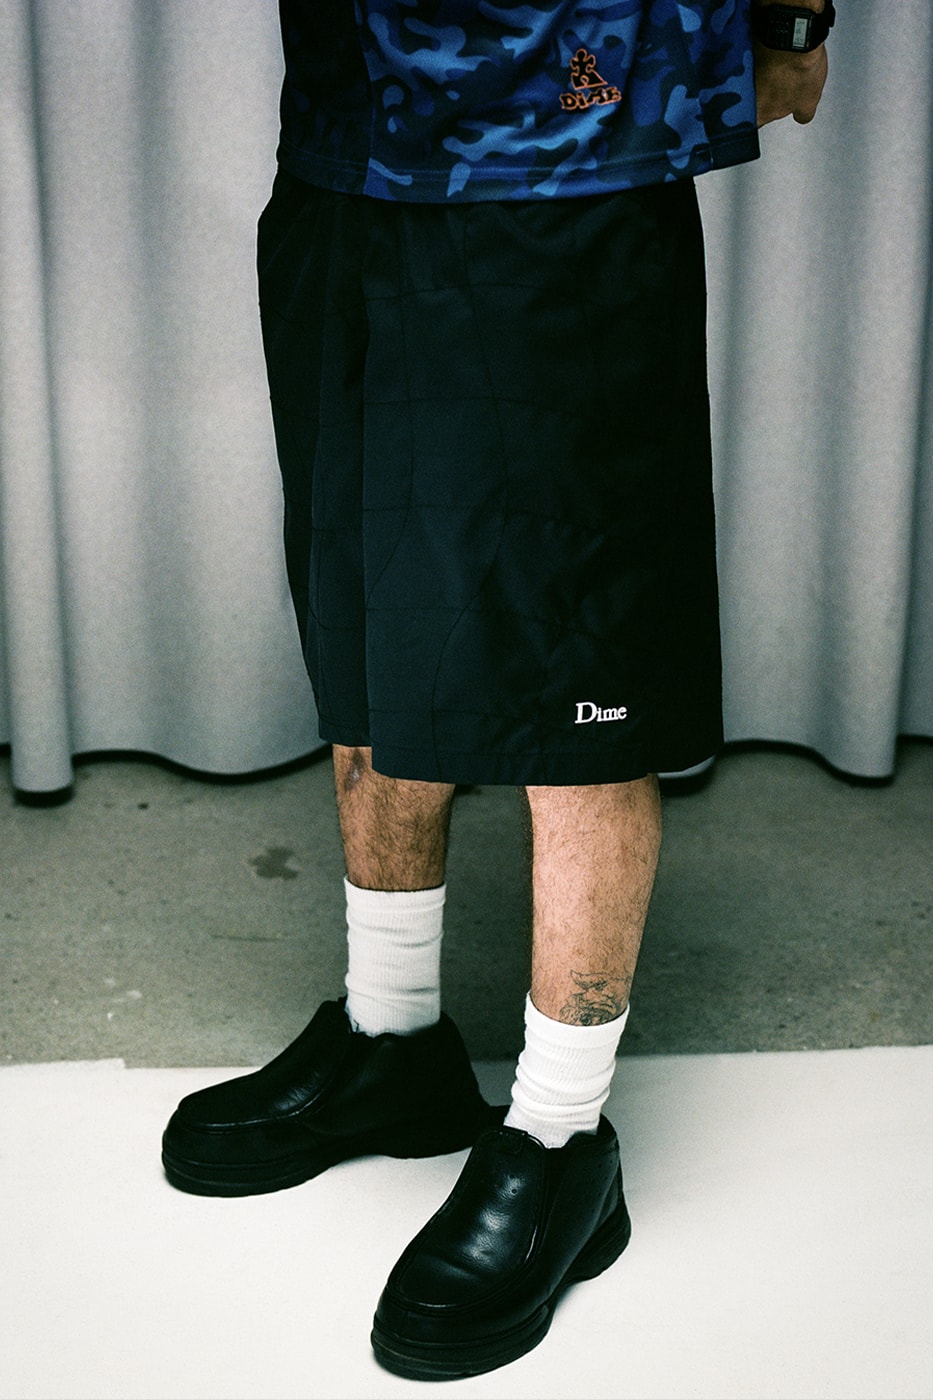 Dime Spring 2024 Delivery 1 Is All About Athletic Comfort Release Info soccer football jersey sweatpants hoodies sweaters polos sweatpants chore jackets streetwear skatewear golf polo jerseys masters 